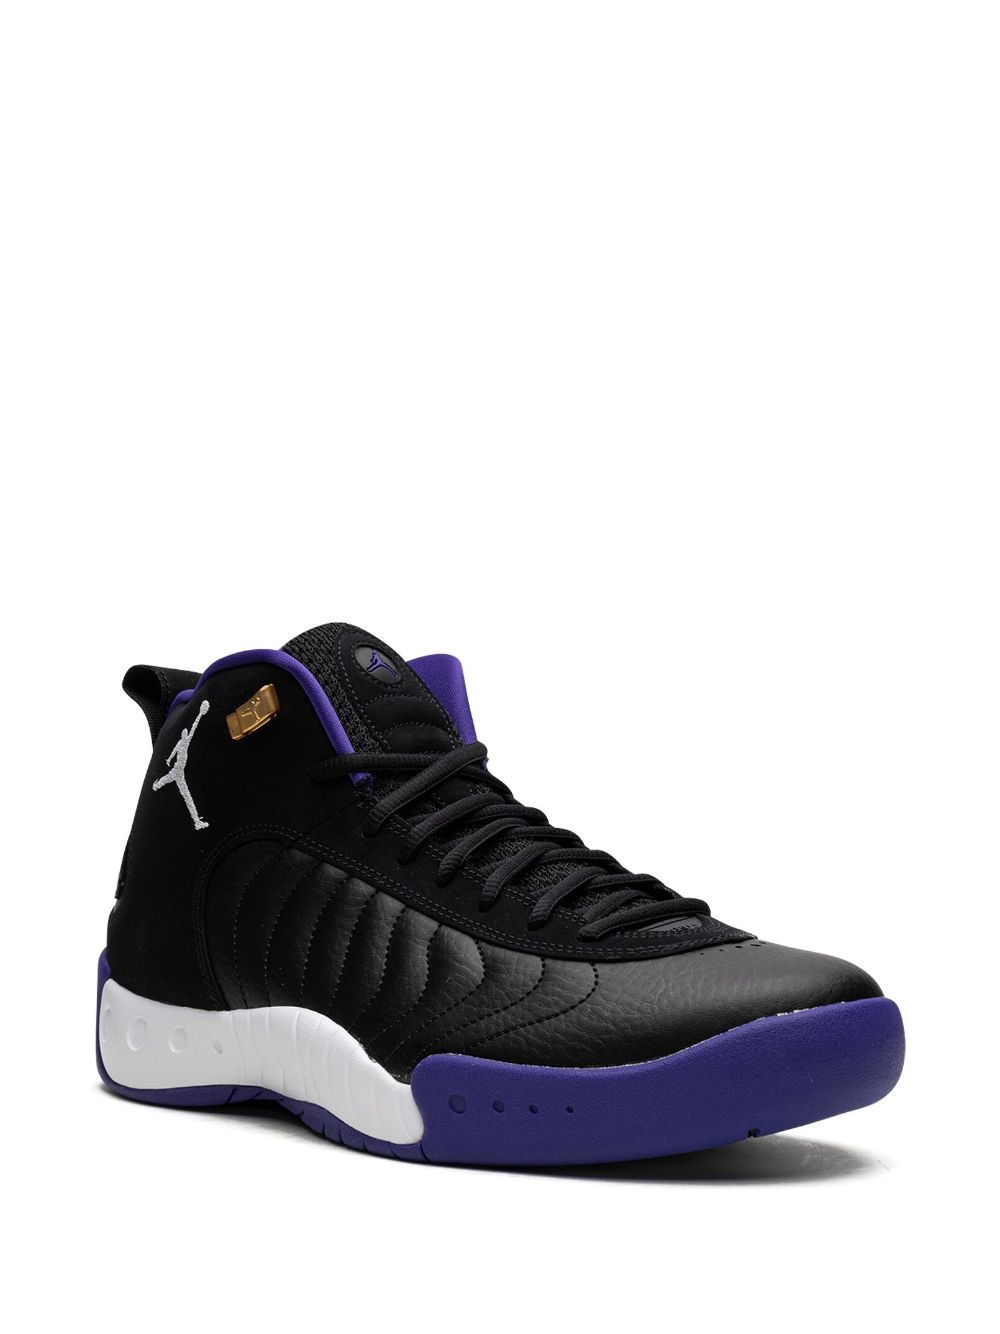 Jumpman Pro "Concord" sneakers - 2